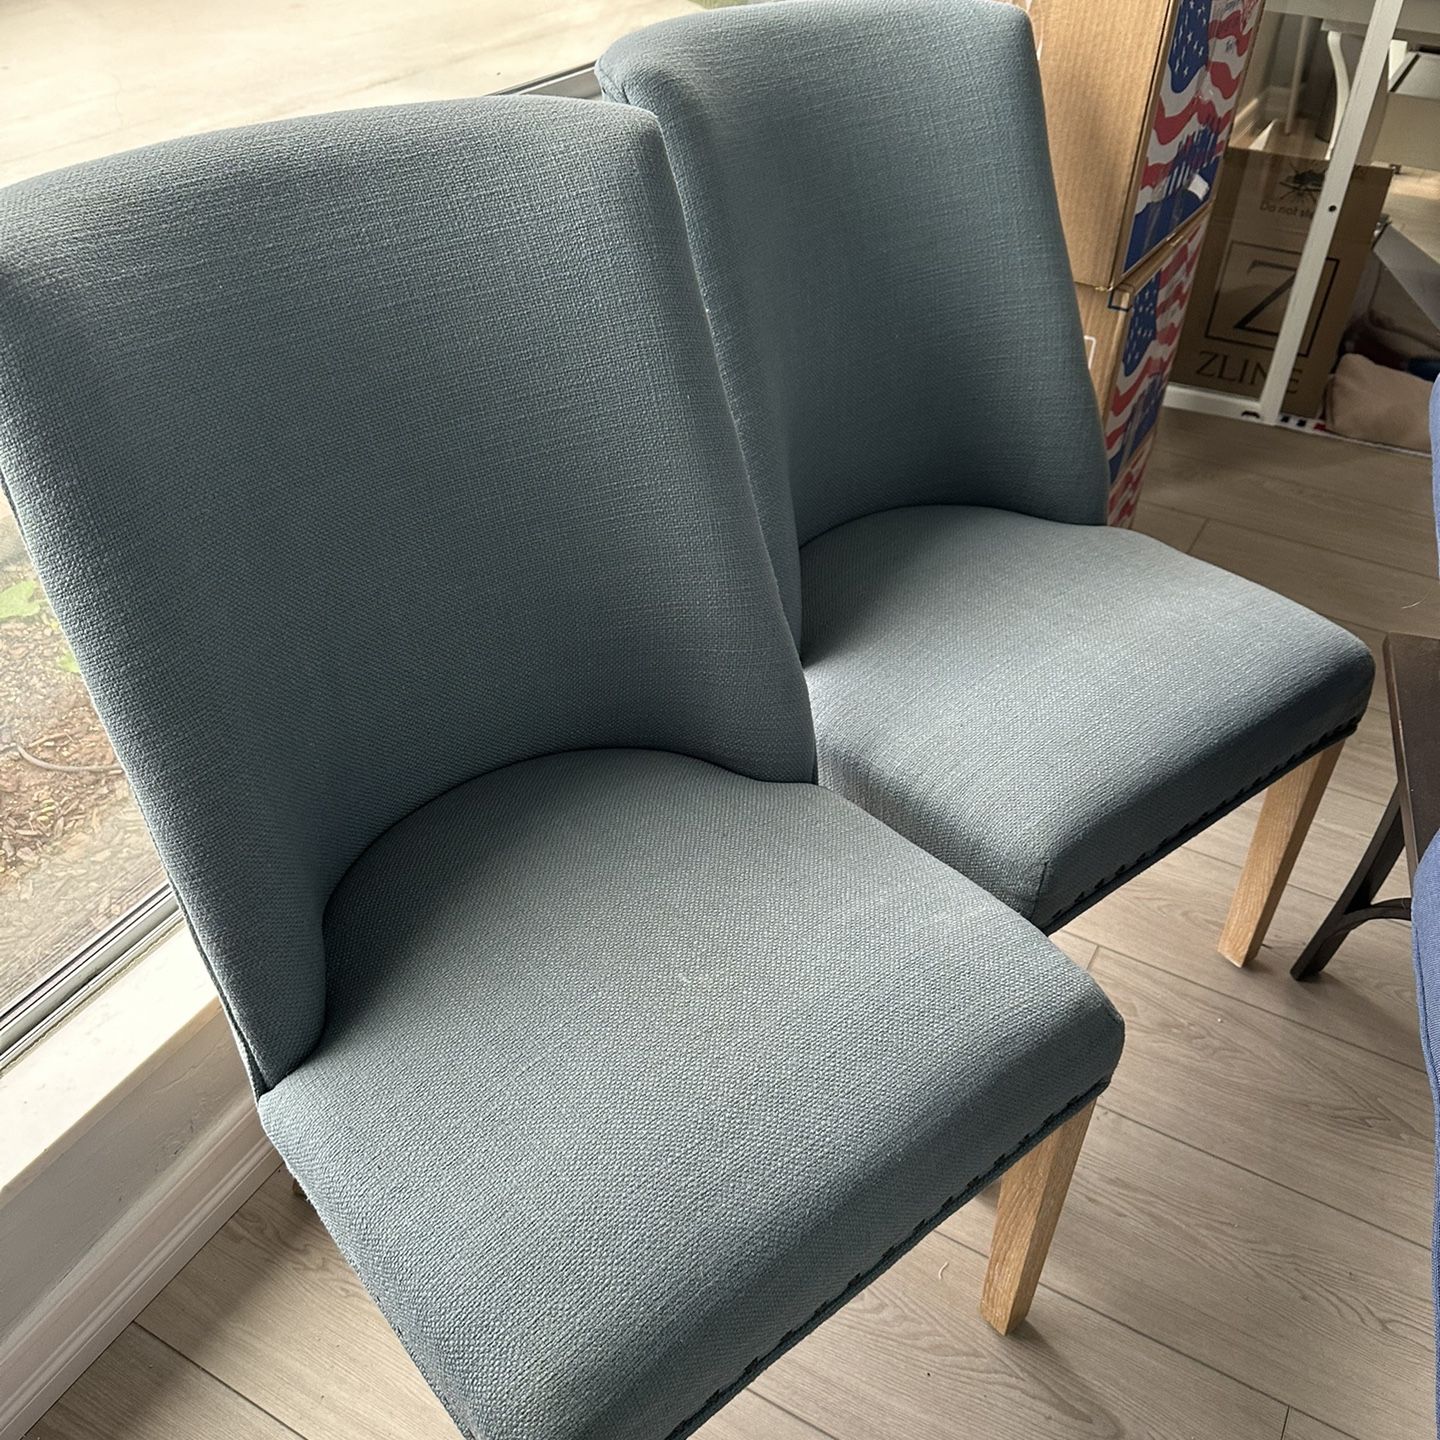 Two Pier One Casual Living Chairs